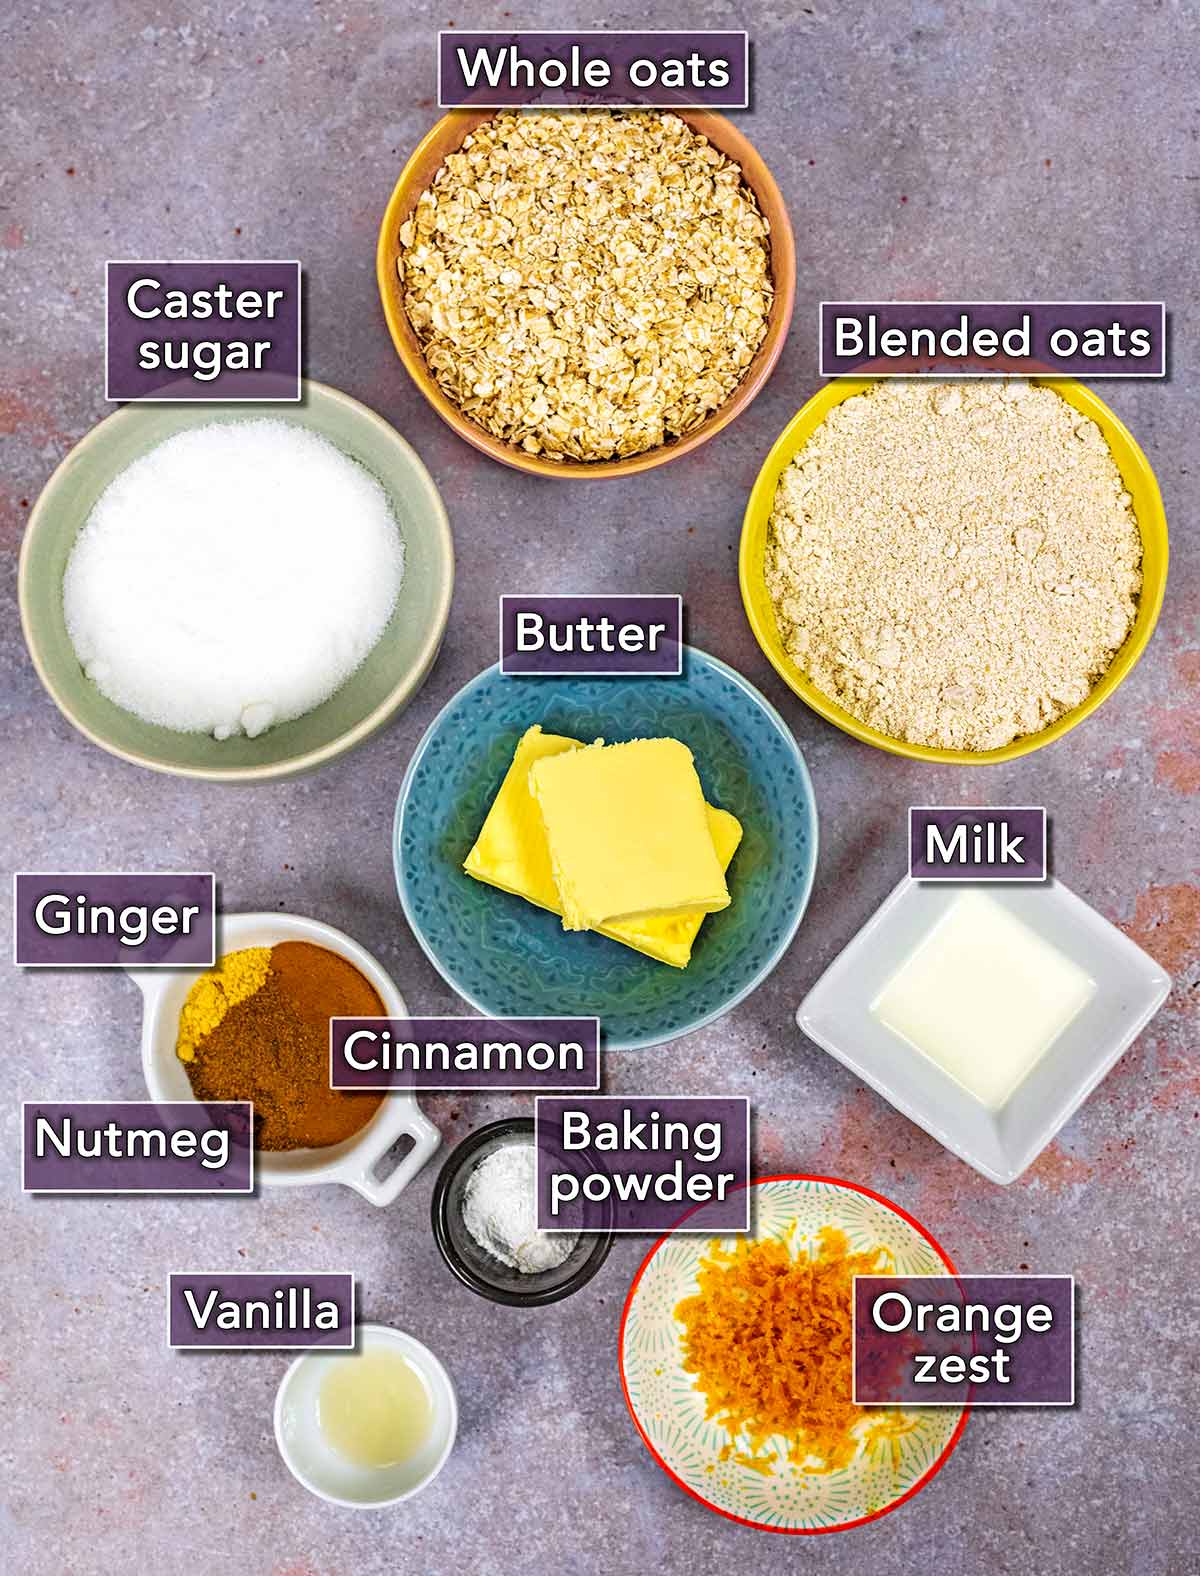 The ingredients needed for this recipe on a stone surface, each with a text overlay label.